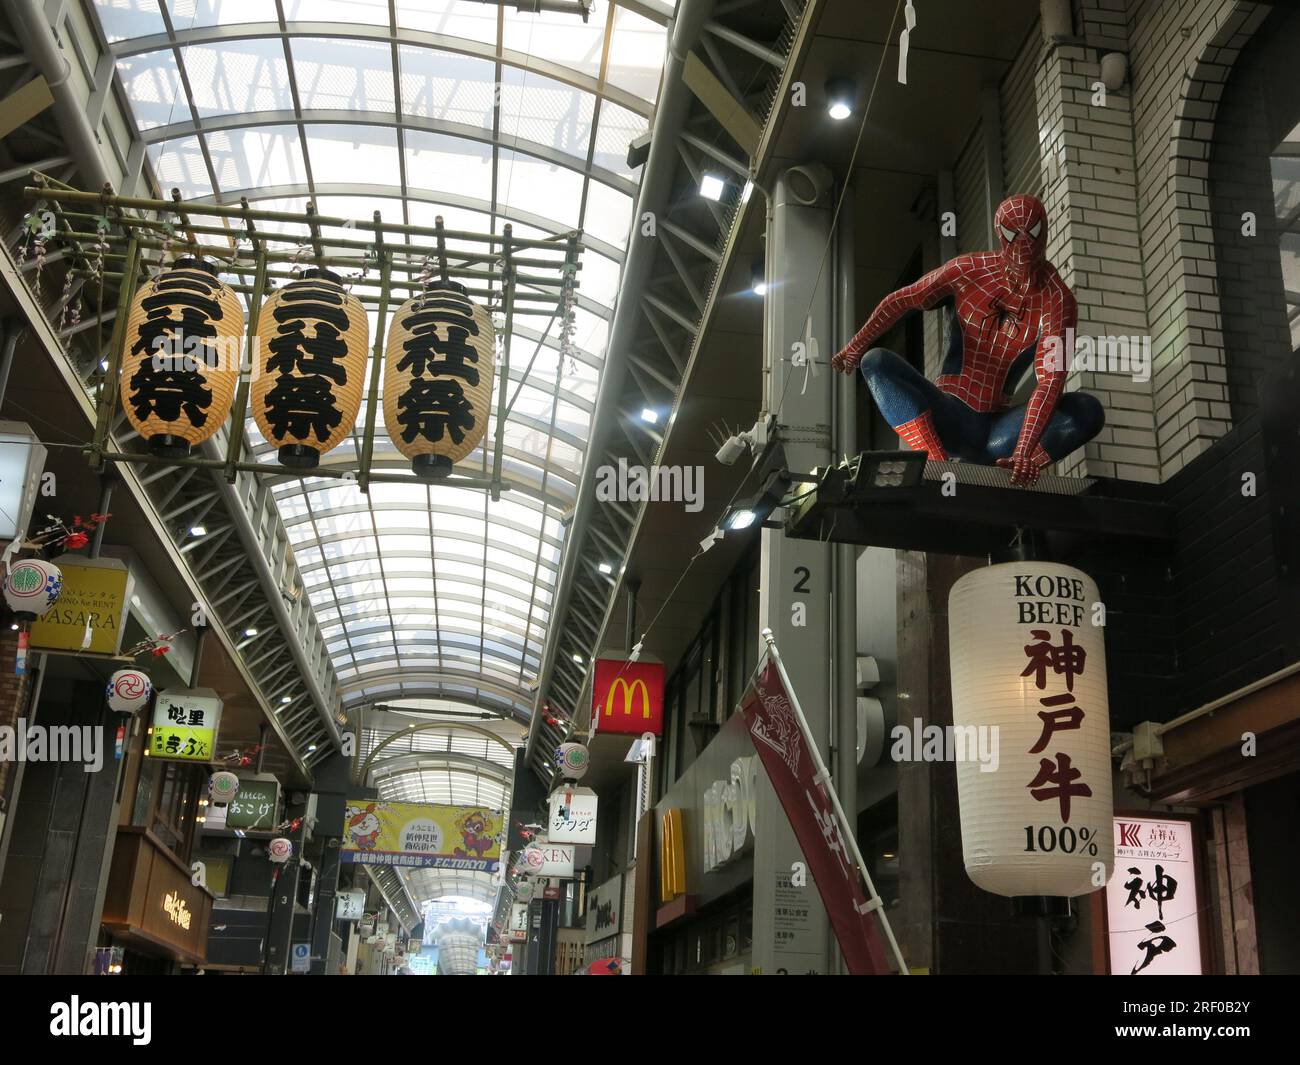 Spiderman and McDonalds are two of the recognisable icons in the Shin Nakamise covered arcade shopping street in Asakusa, a busy Tokyo tourist area. Stock Photo